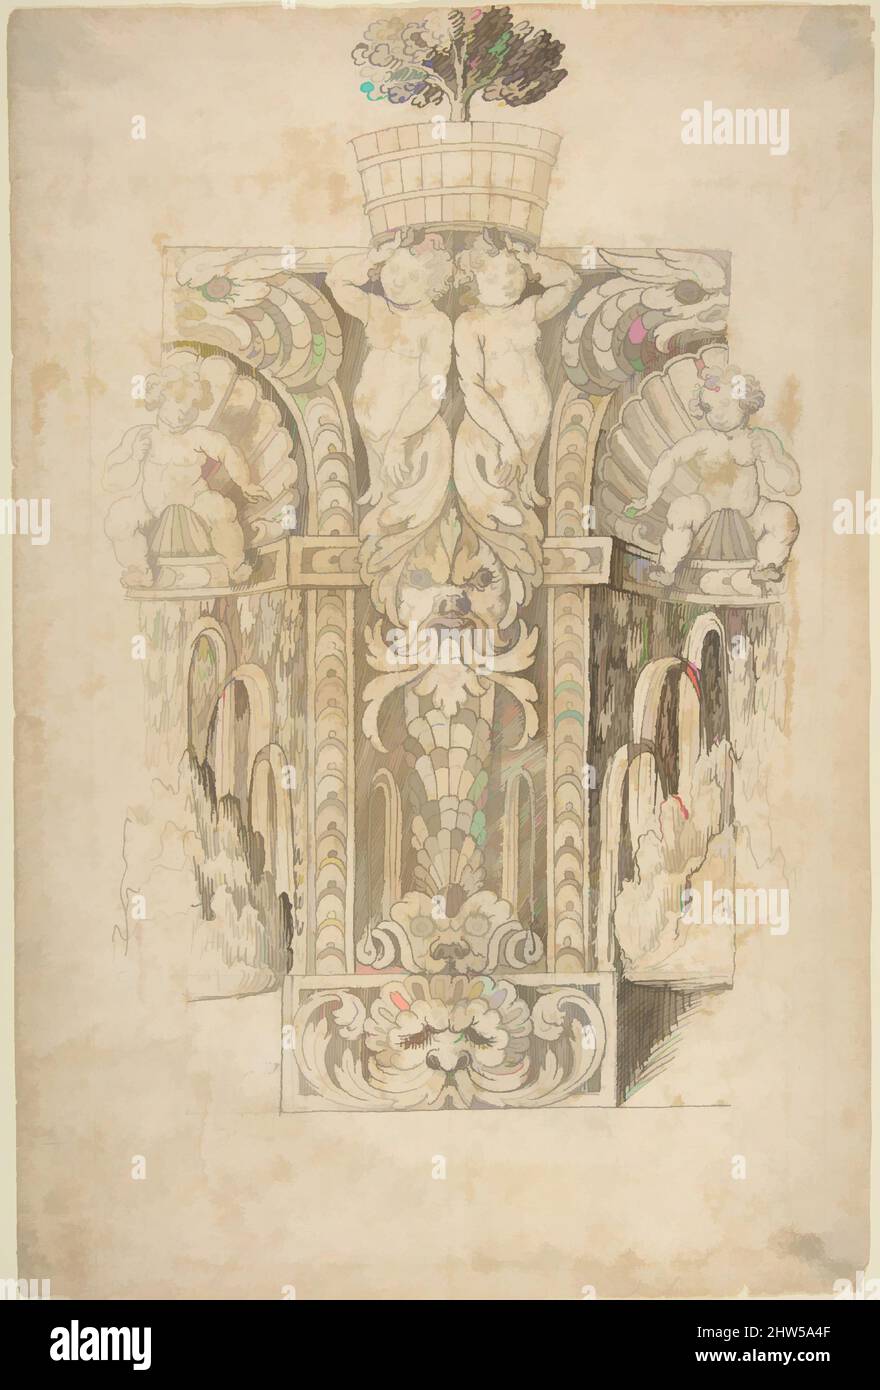 Art inspired by Design for a Wall Fountain, 1550–1620, Pen and brown ink, brush and light brown wash over lead point, 14 3/4 x 9 3/4 in. (37.4 x 24.8 cm), Drawings, Anonymous, Italian, Lombard, 16th century, Classic works modernized by Artotop with a splash of modernity. Shapes, color and value, eye-catching visual impact on art. Emotions through freedom of artworks in a contemporary way. A timeless message pursuing a wildly creative new direction. Artists turning to the digital medium and creating the Artotop NFT Stock Photo